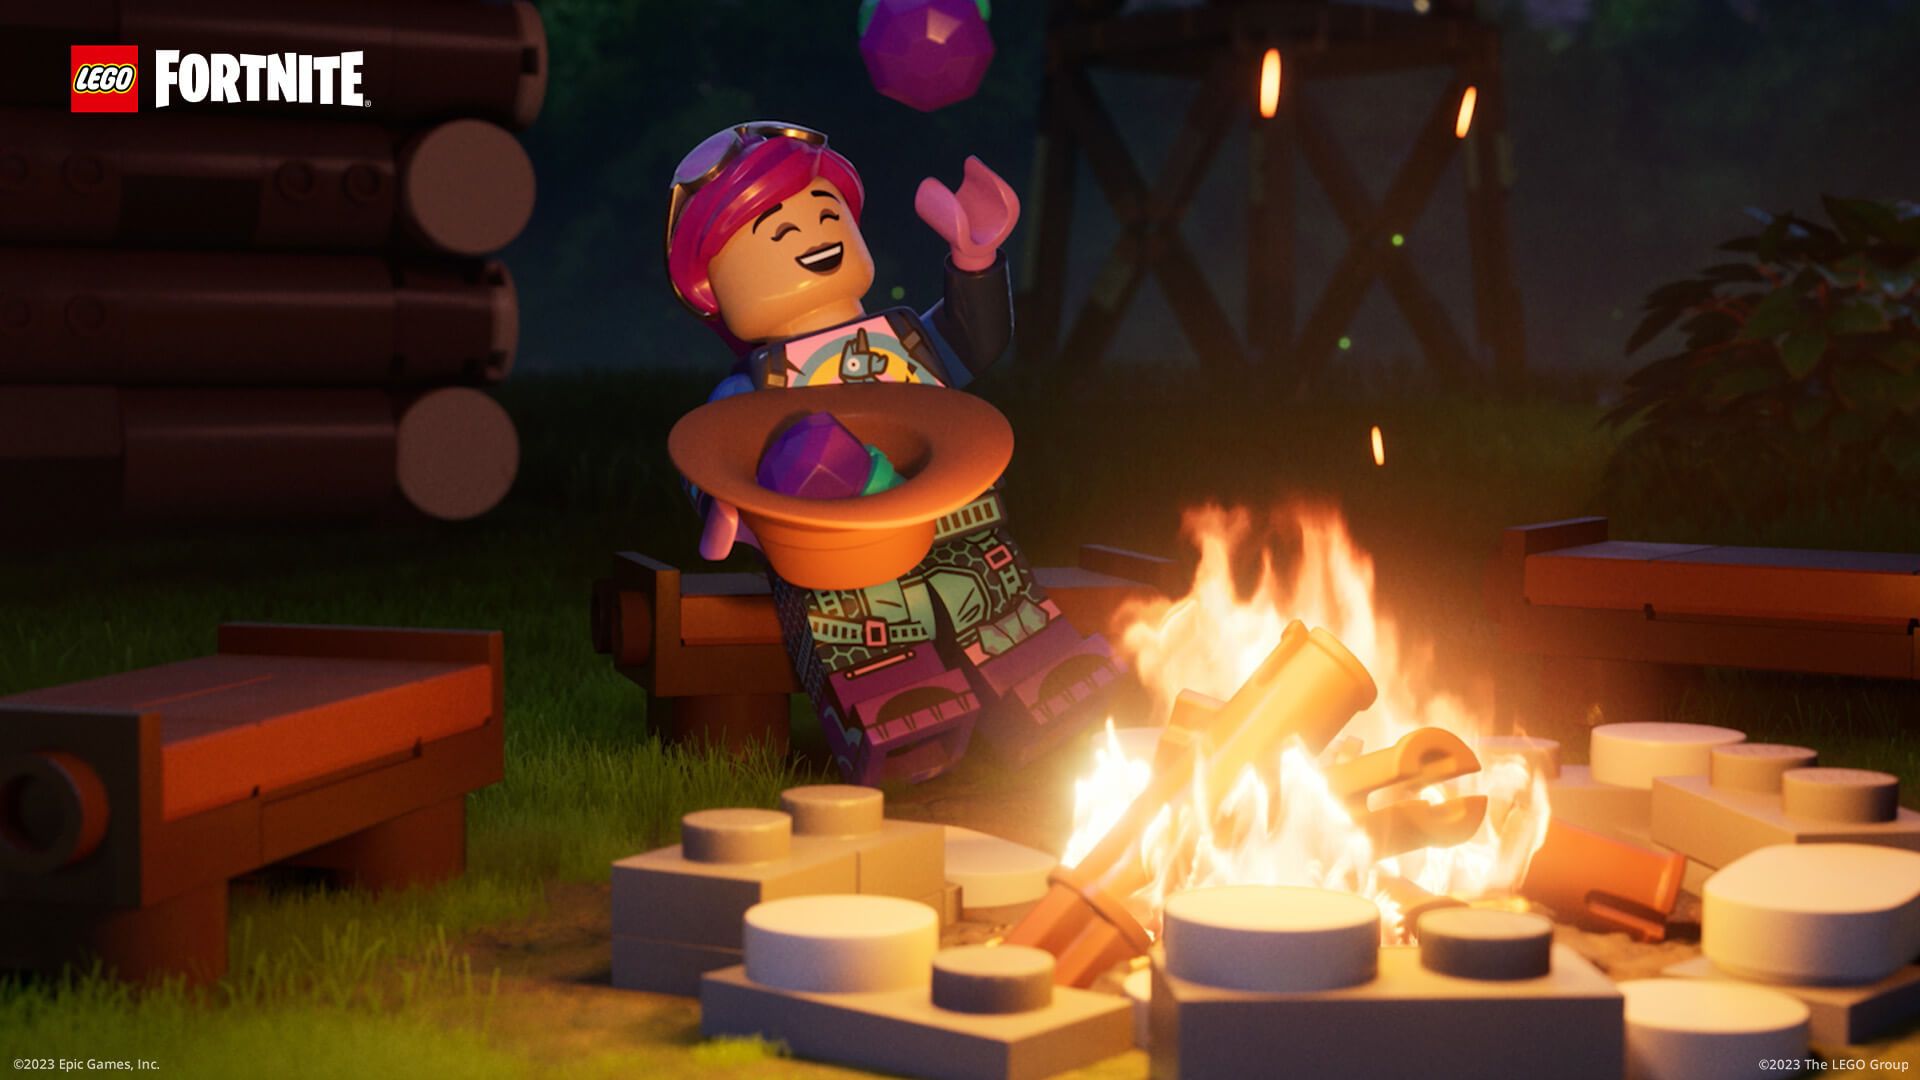 A Lego Fortnite character sitting and eating a bowl of fruit.